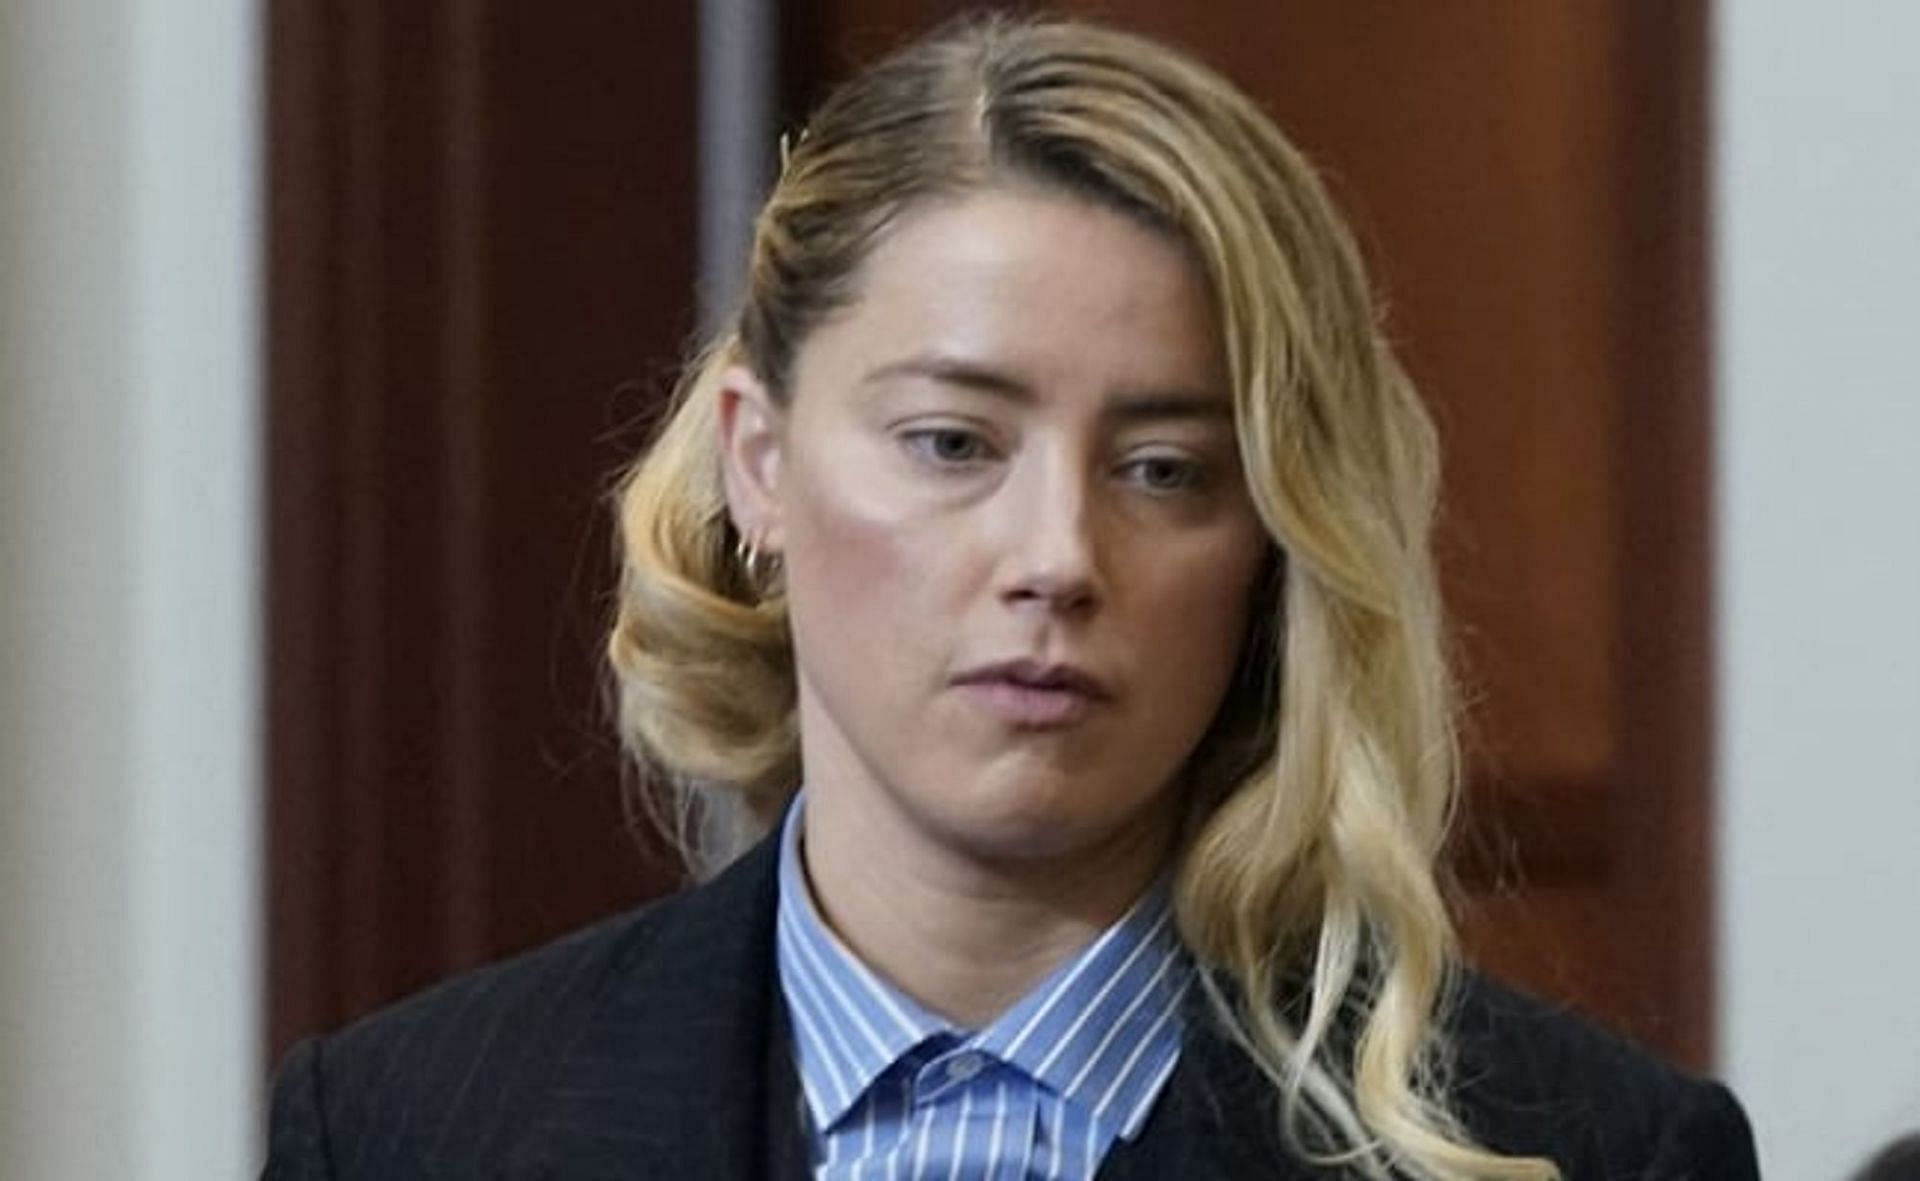 Amber Heard fans donate almost $2,000 in support of the actress via GoFundMe (Image via Reuters)